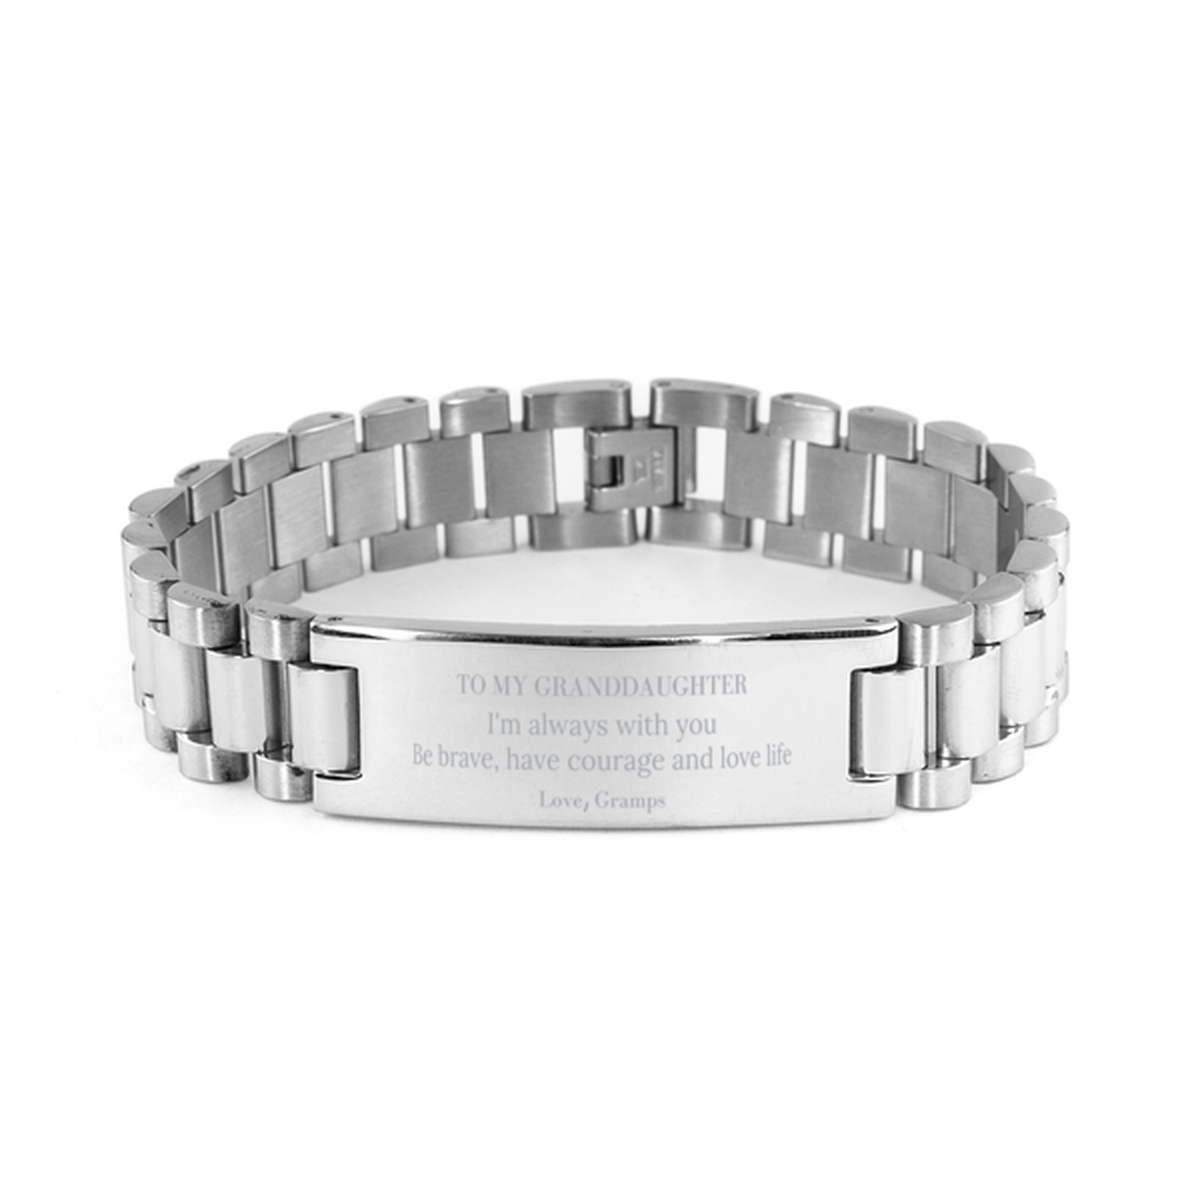 To My Granddaughter Gifts from Gramps, Unique Ladder Stainless Steel Bracelet Inspirational Christmas Birthday Graduation Gifts for Granddaughter I'm always with you. Be brave, have courage and love life. Love, Gramps